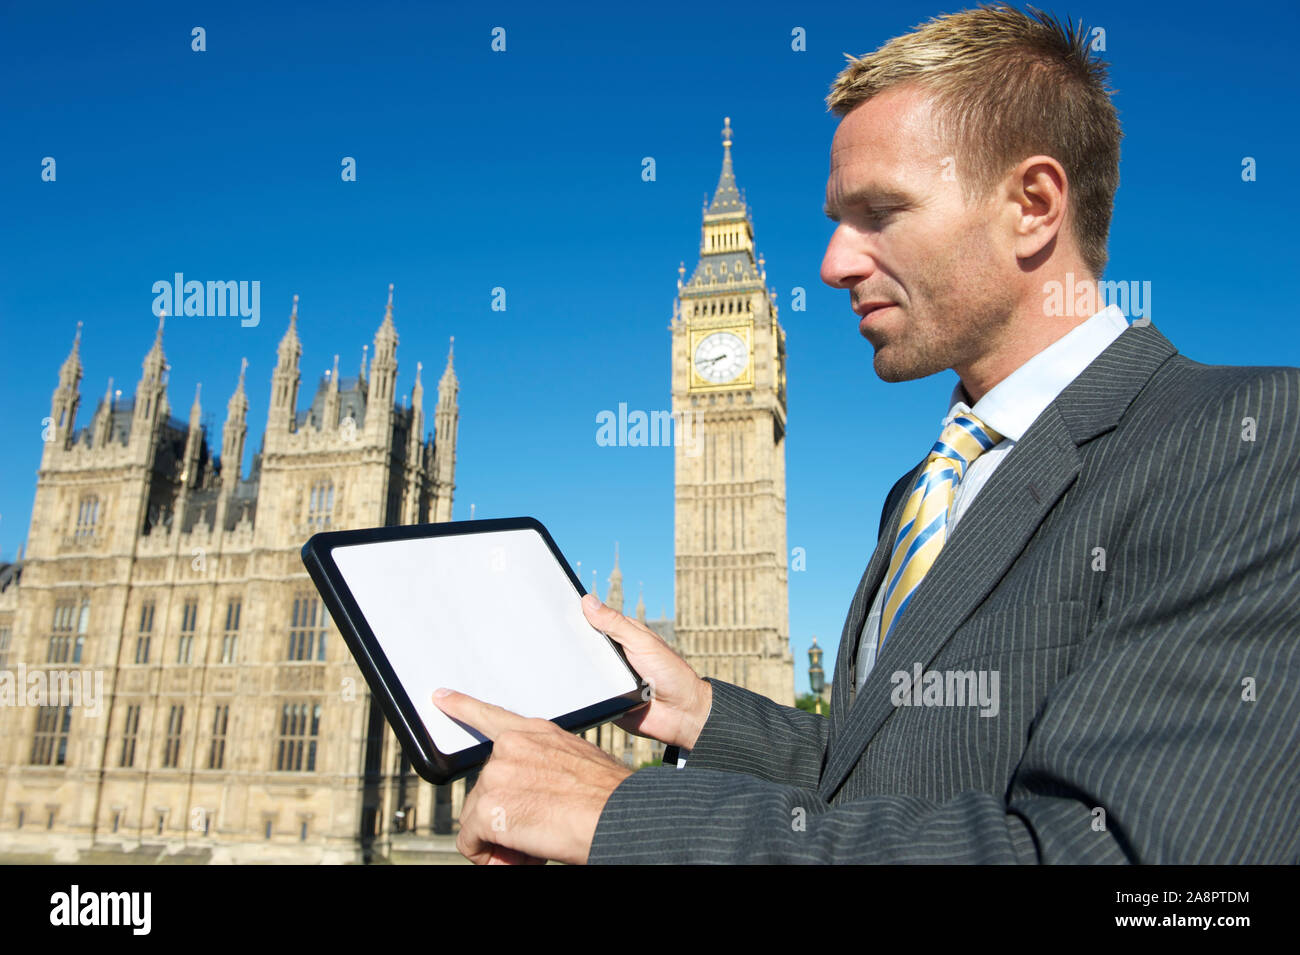 British politician using tablet computer in front of the Houses of Parliament and Big Ben under bright sunny skies in London, UK Stock Photo